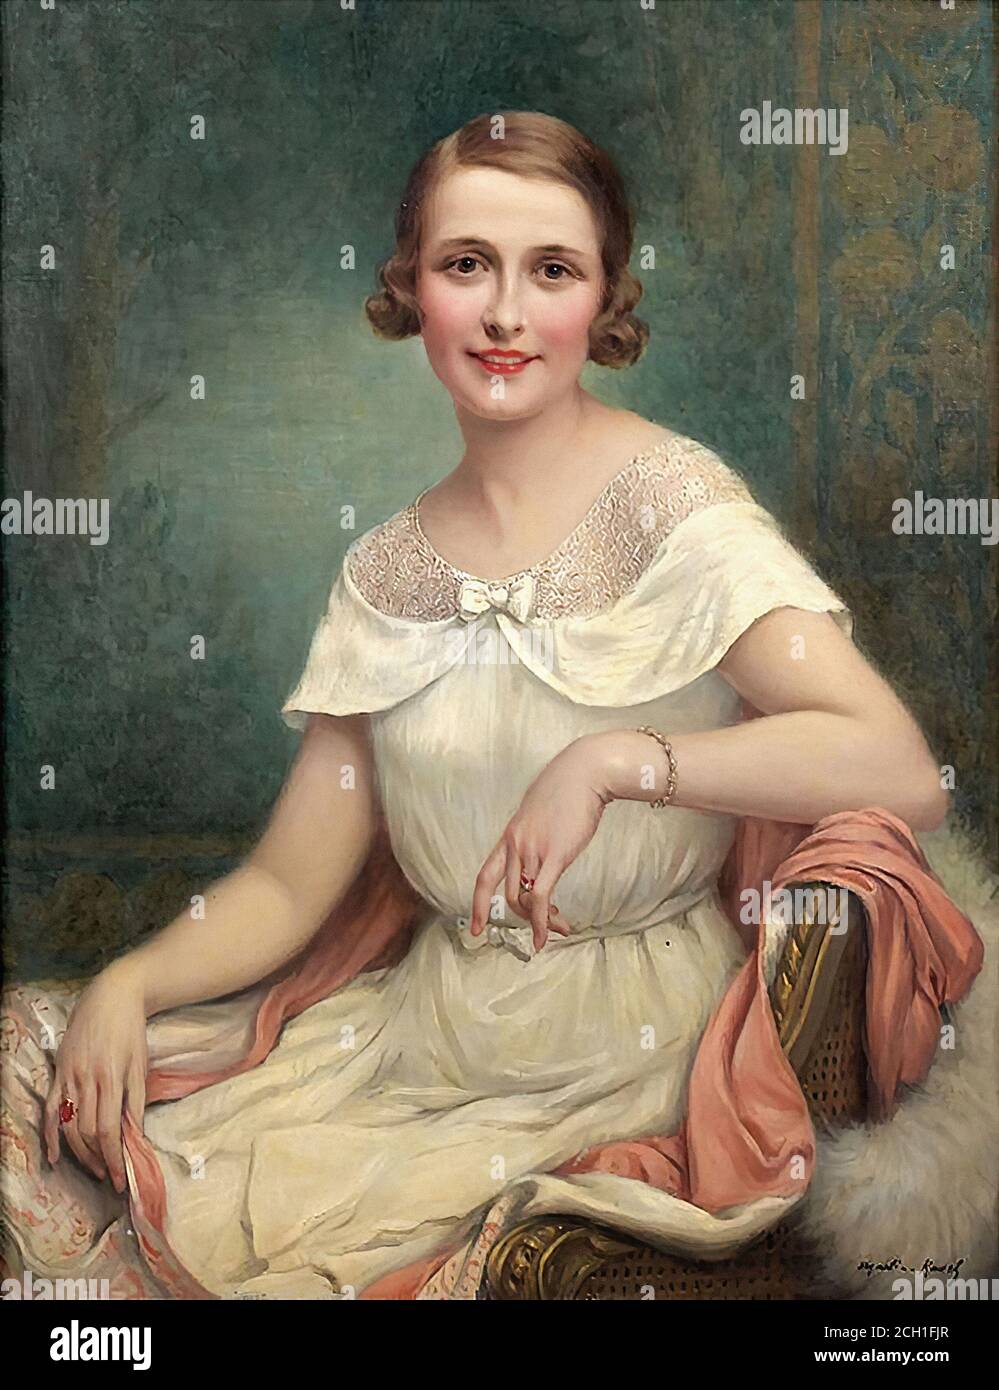 Martin-Kavel François - Portrait De Femme En Robe Blanche - French School -  19th and Early 20th Century Stock Photo - Alamy